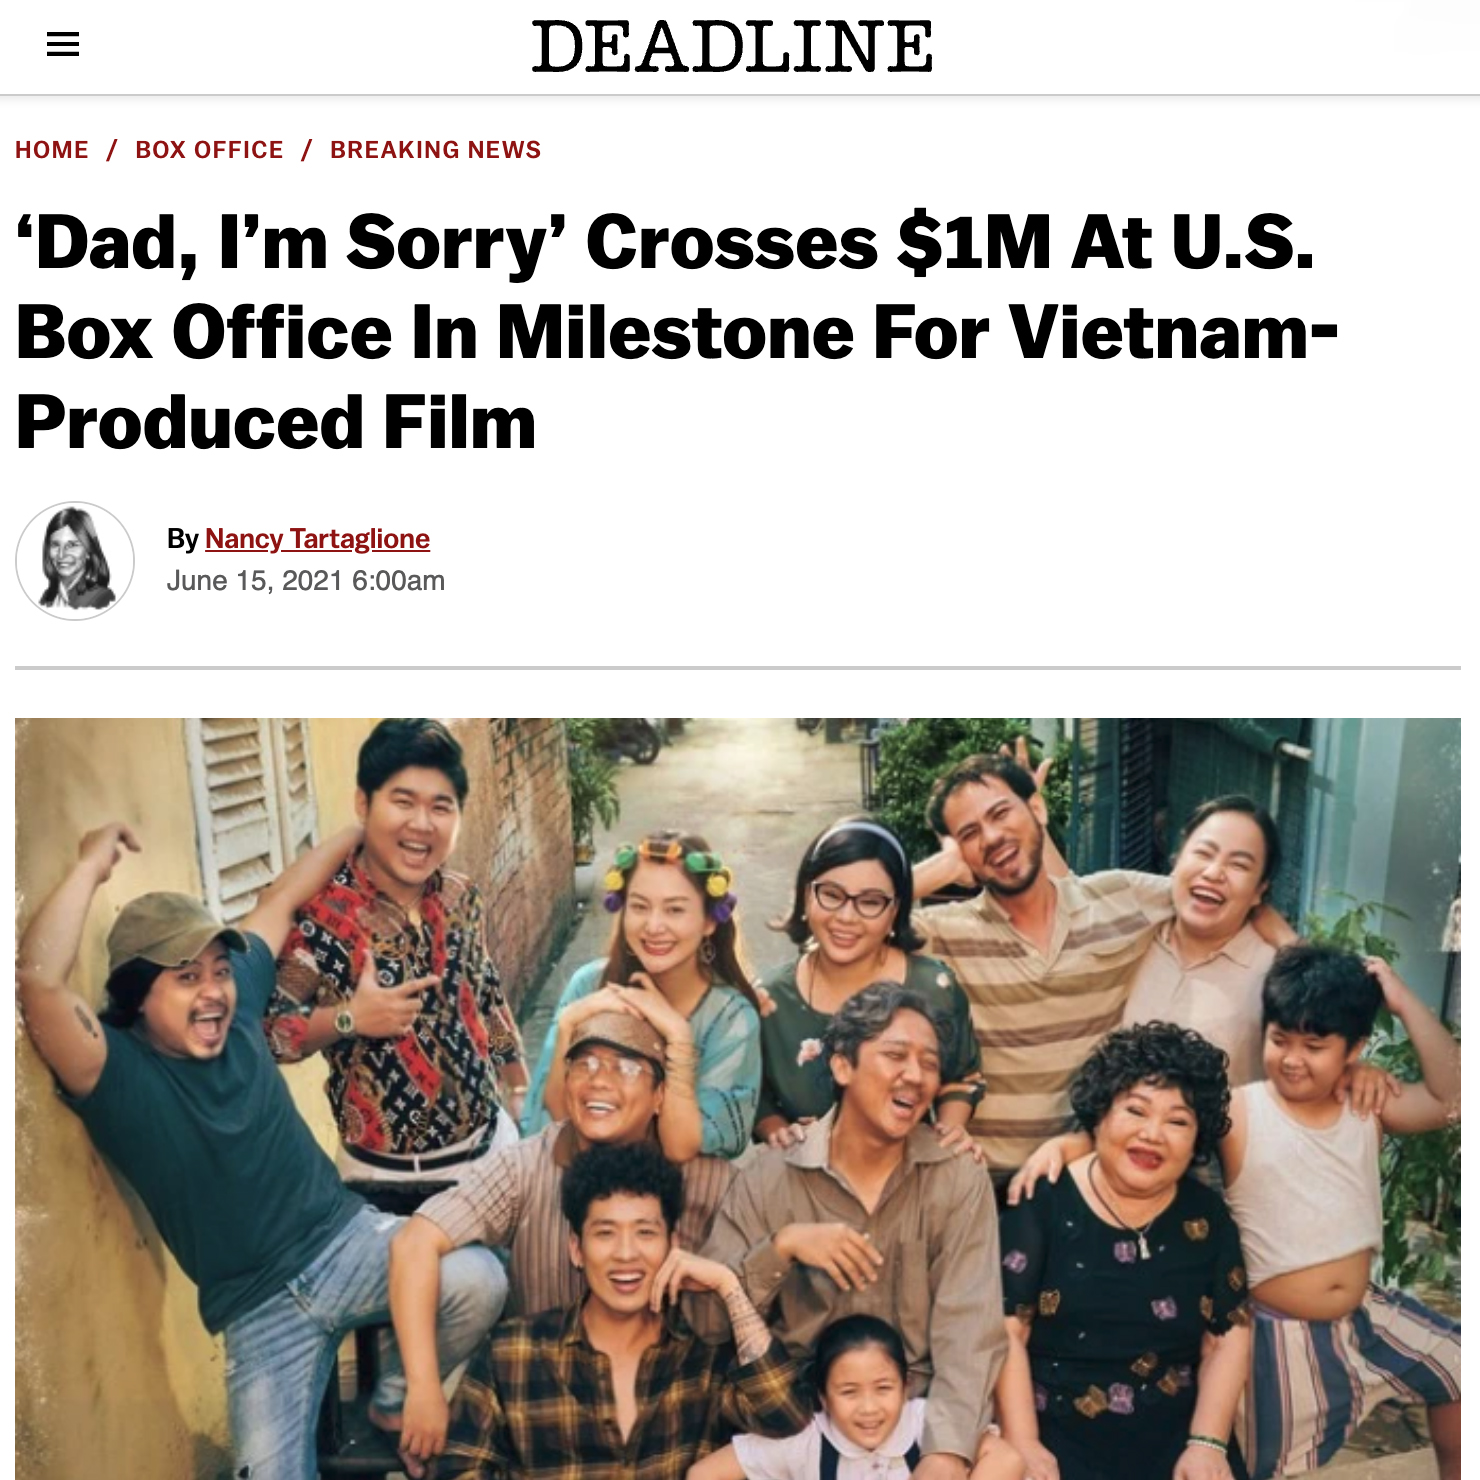 ‘Dad, I’m Sorry’ Crosses $1M At U.S. Box Office In Milestone For Vietnam-Produced Film